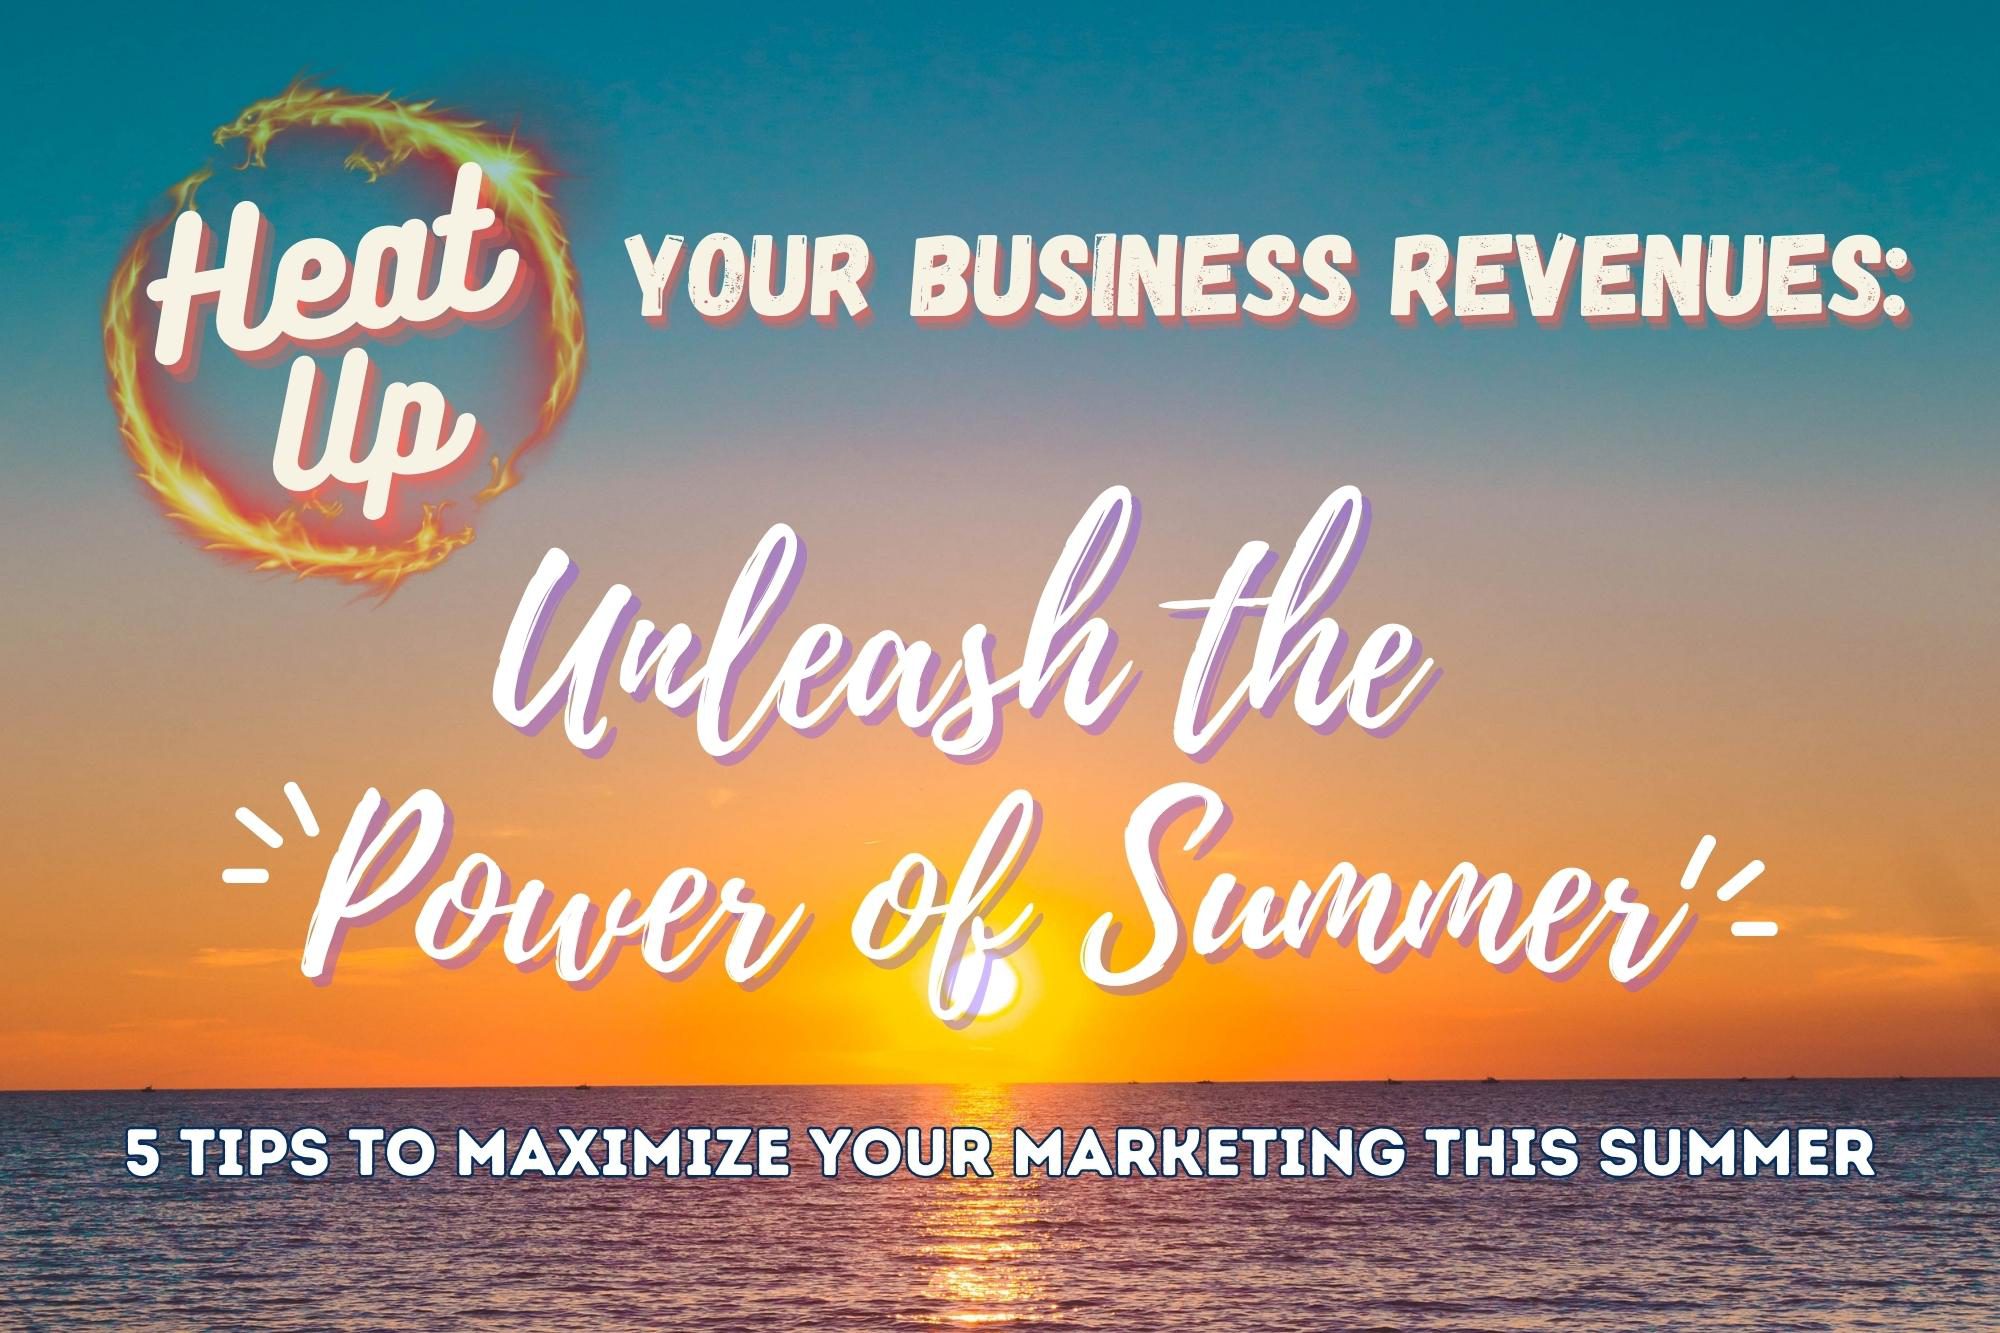 Heat Up Your Business Revenues, Unleash the Power of Summer. 5 Tips to Maximize Summer Marketing